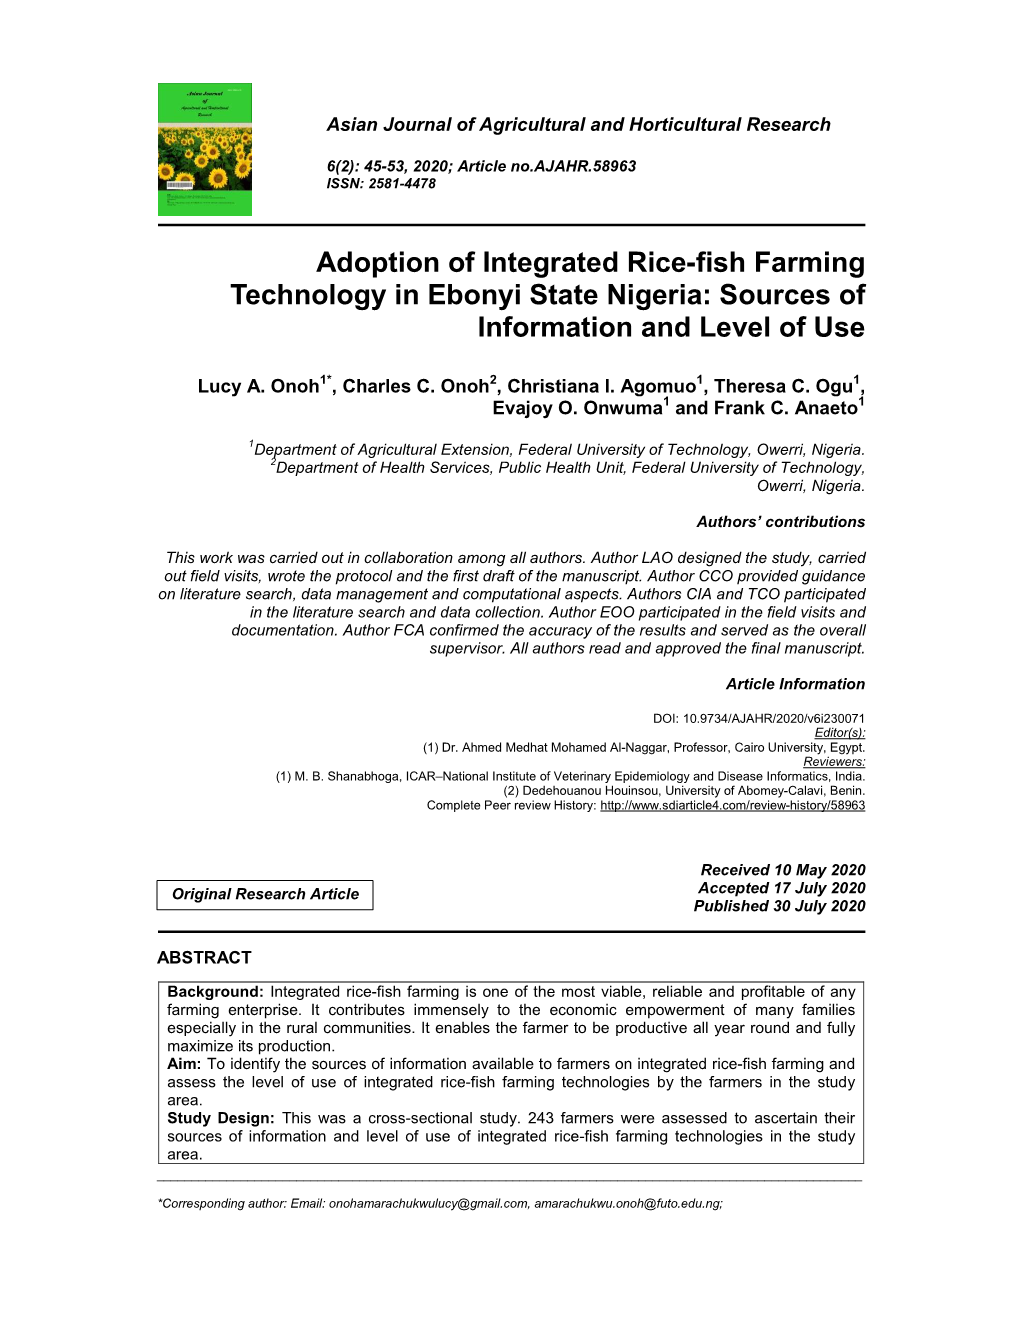 Adoption of Integrated Rice-Fish Farming Technology in Ebonyi State Nigeria: Sources of Information and Level of Use